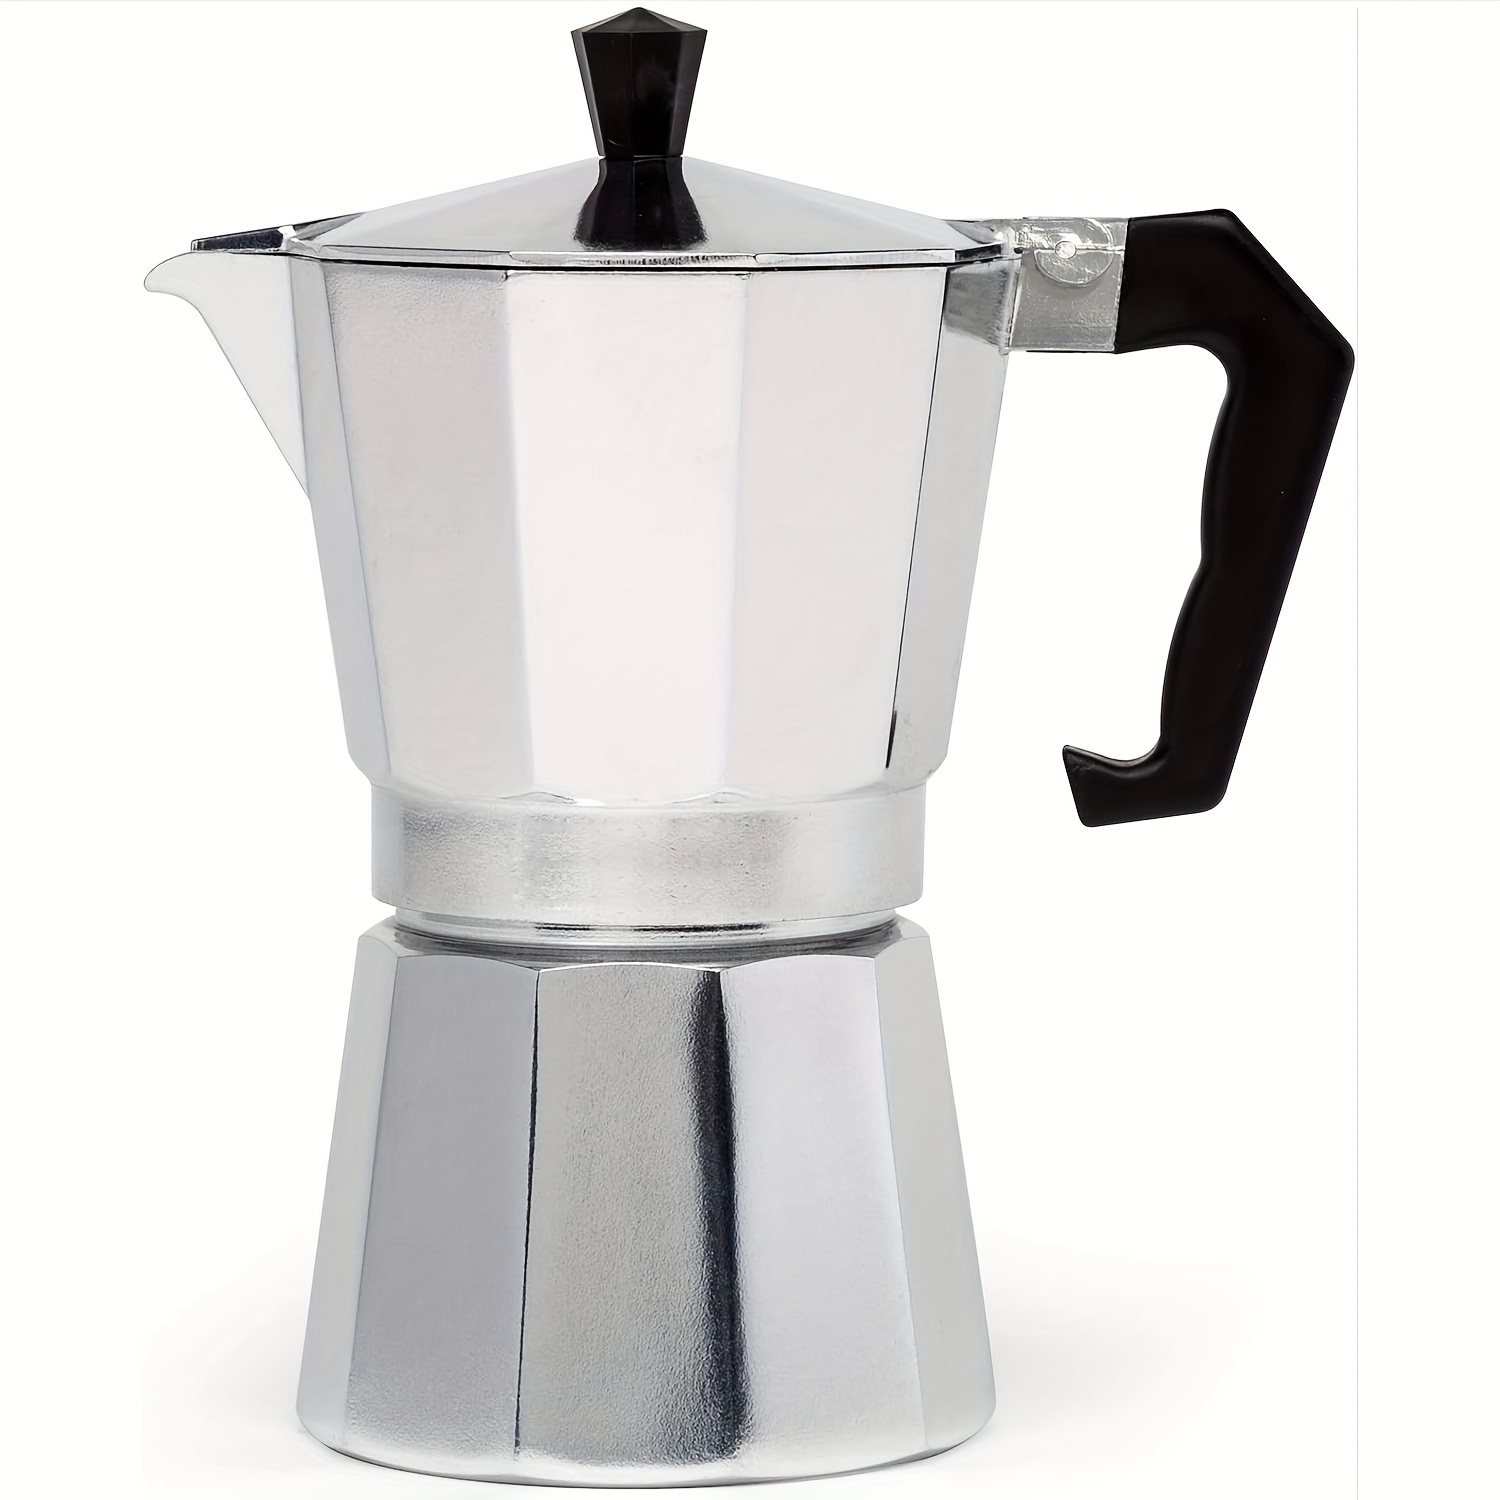 Fdit 200ml Stainless Steel Stovetop Coffee Maker Durable Espresso Pot Silver Moka Pot with Safety Valve